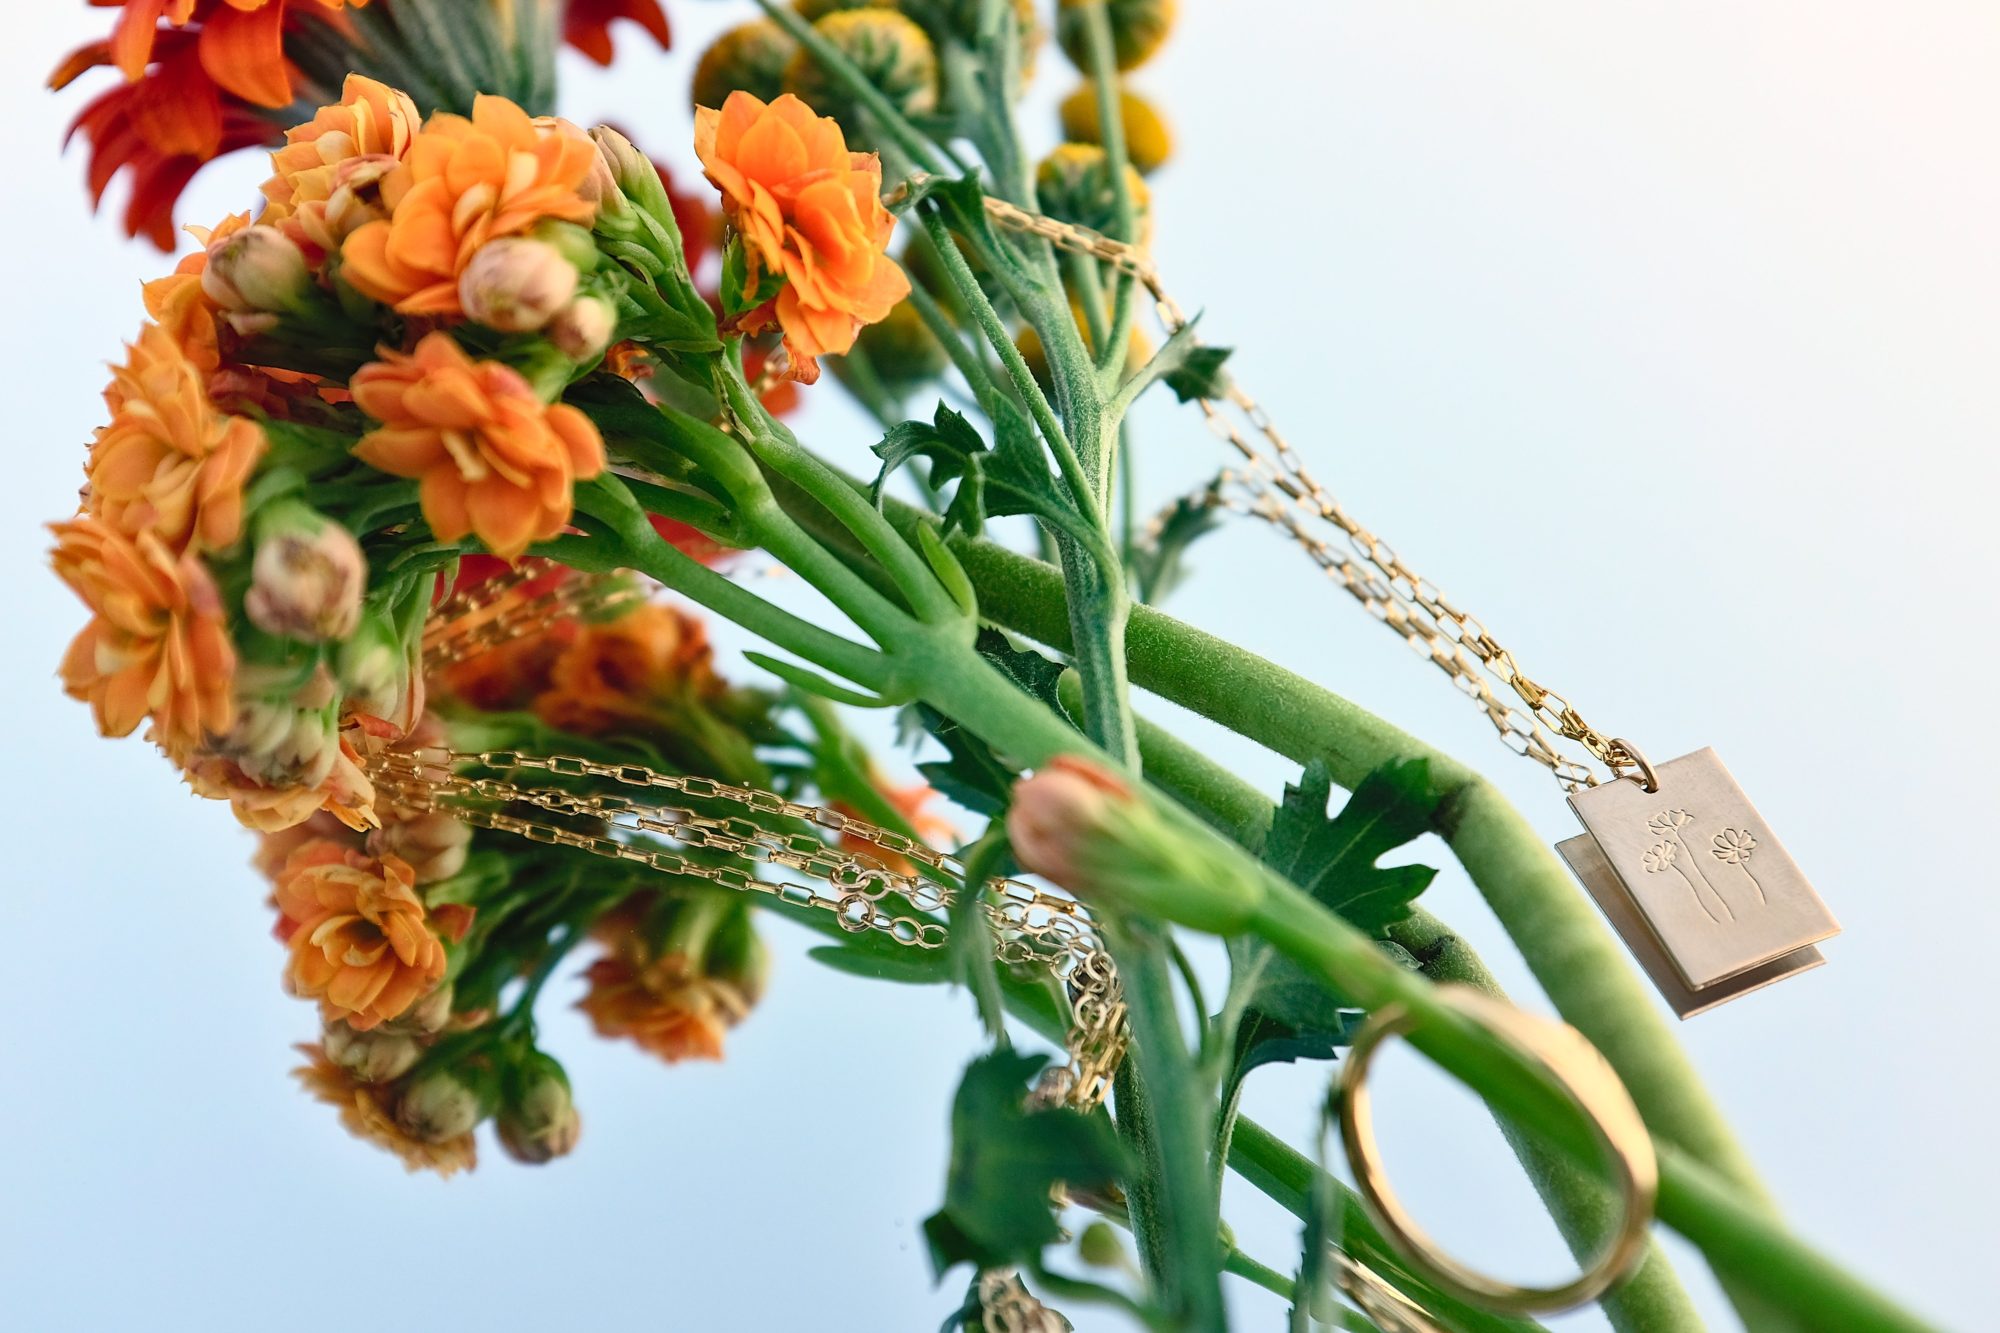 GLDN's Marseille necklace is in focus, mixed in with a bouquet of floweres